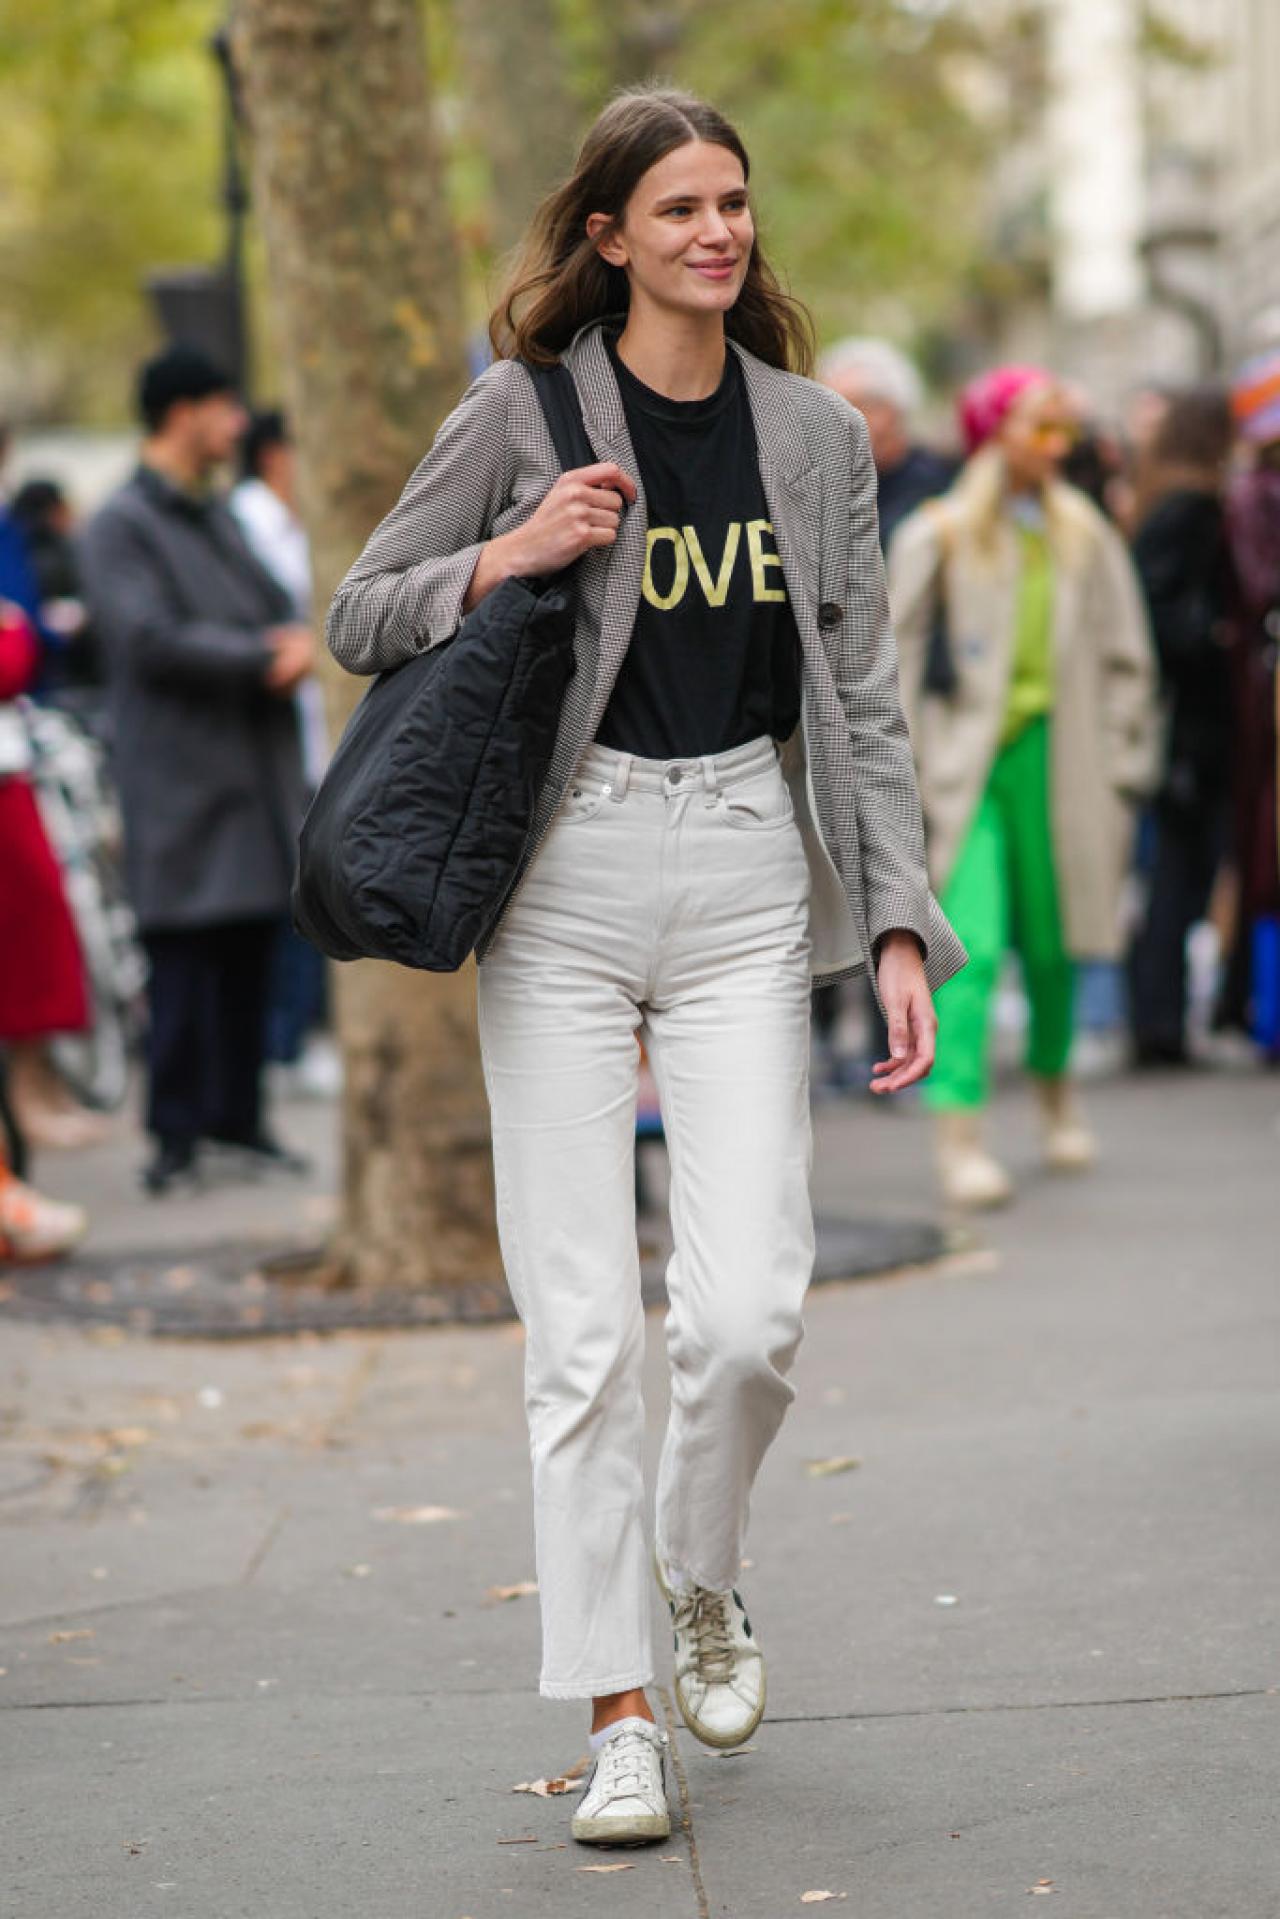 PARIS, FRANCE - OCTOBER 01: A guest wears a black with yellow Love slogan inscription t-shirt, a black and white houndstooth print pattern blazer jacket, a black oversized puffy shoulder bag, white latte high waist denim large pants, white socks, white leather with black V logo sneakers from Veja, outside Loewe, during Paris Fashion Week - Womenswear Spring Summer 2022, on October 01, 2021 in Paris, France. (Photo by Edward Berthelot/Getty Images)